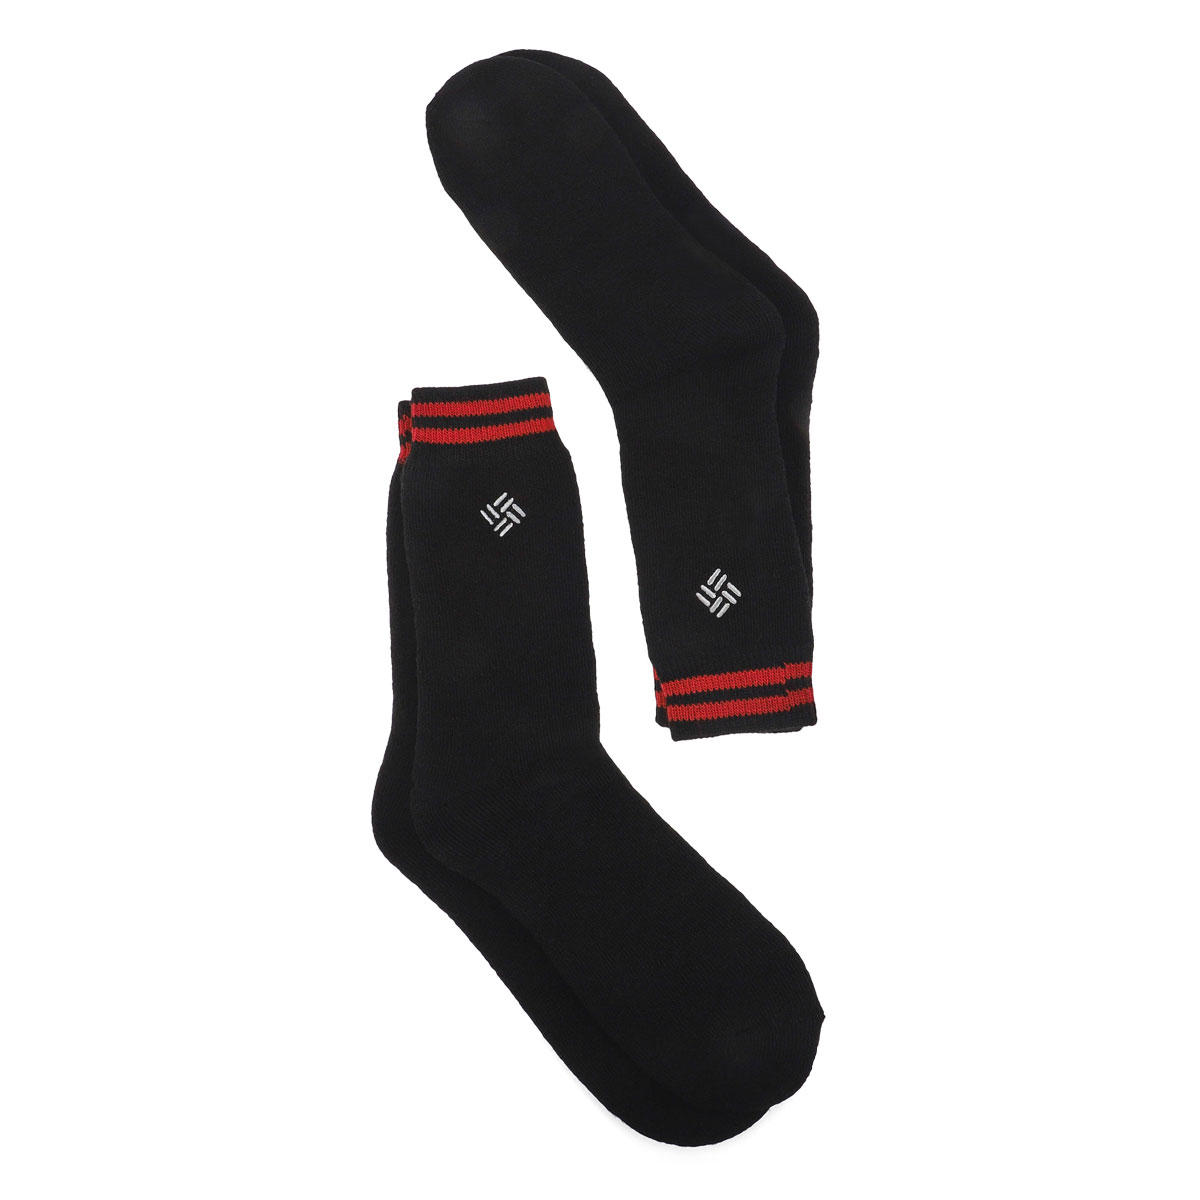 Chaussettes thermiques THERMAL CREW, hommes - 2 p.